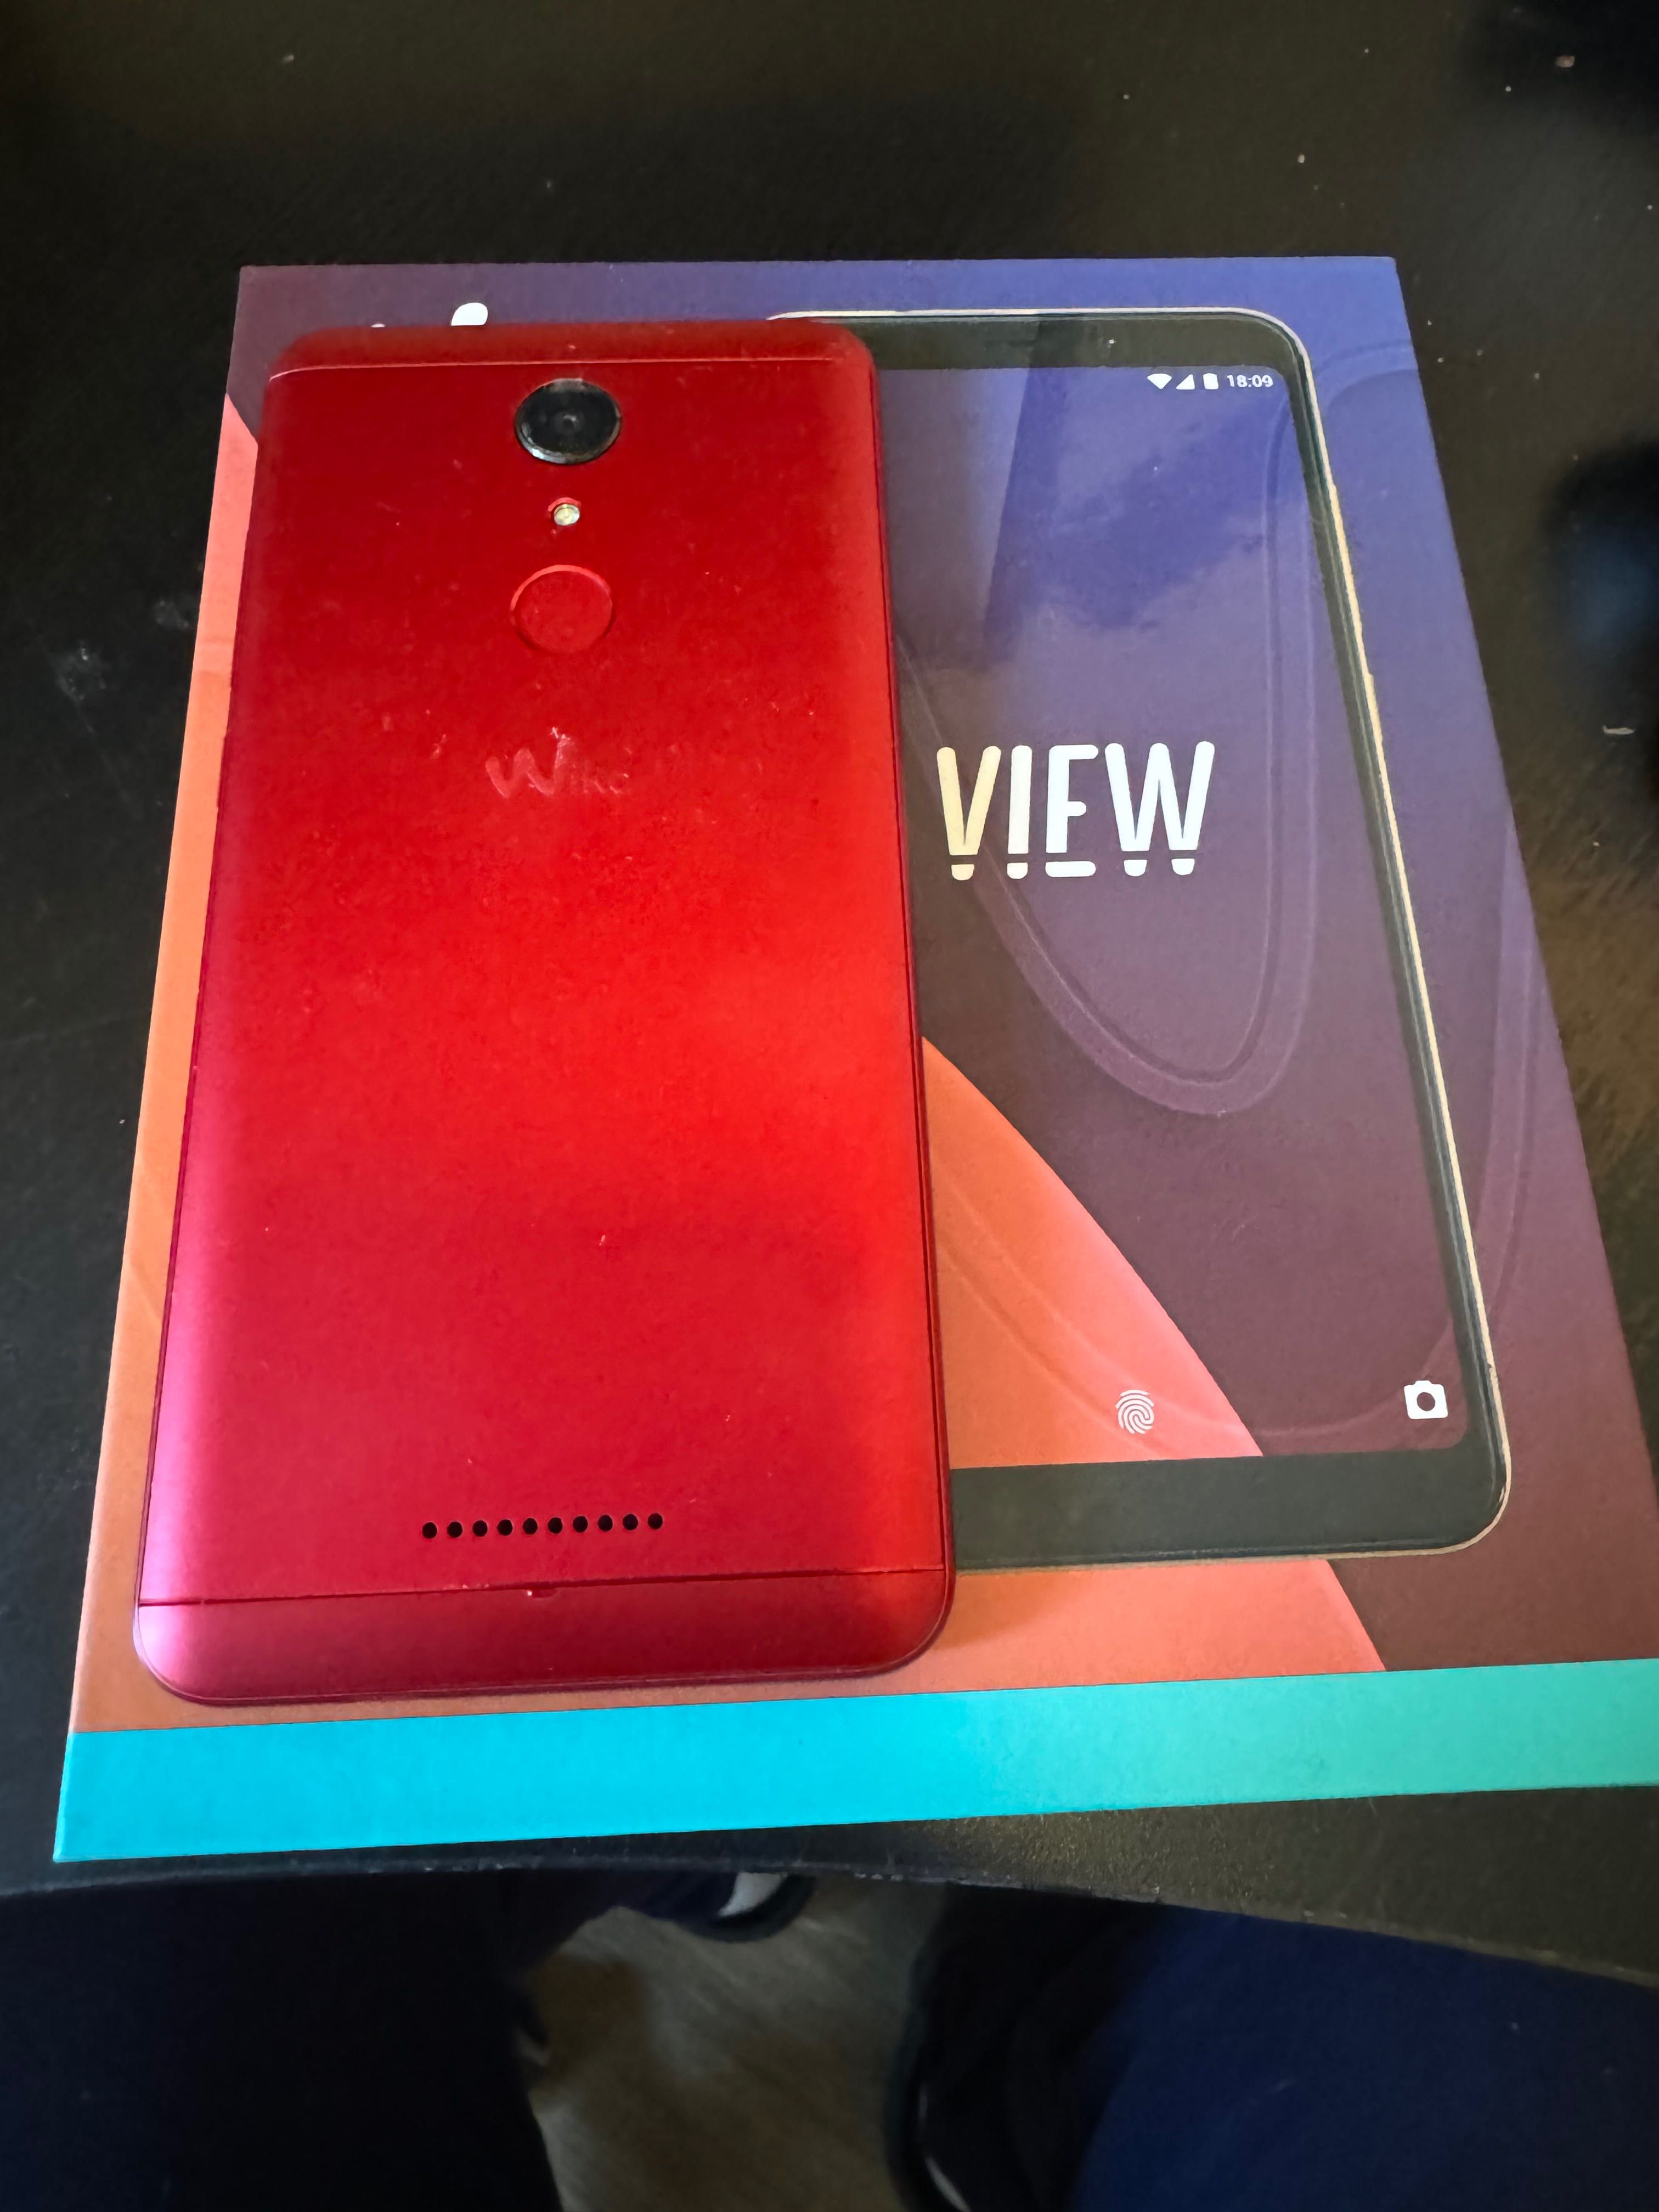 Wiko View red cherry